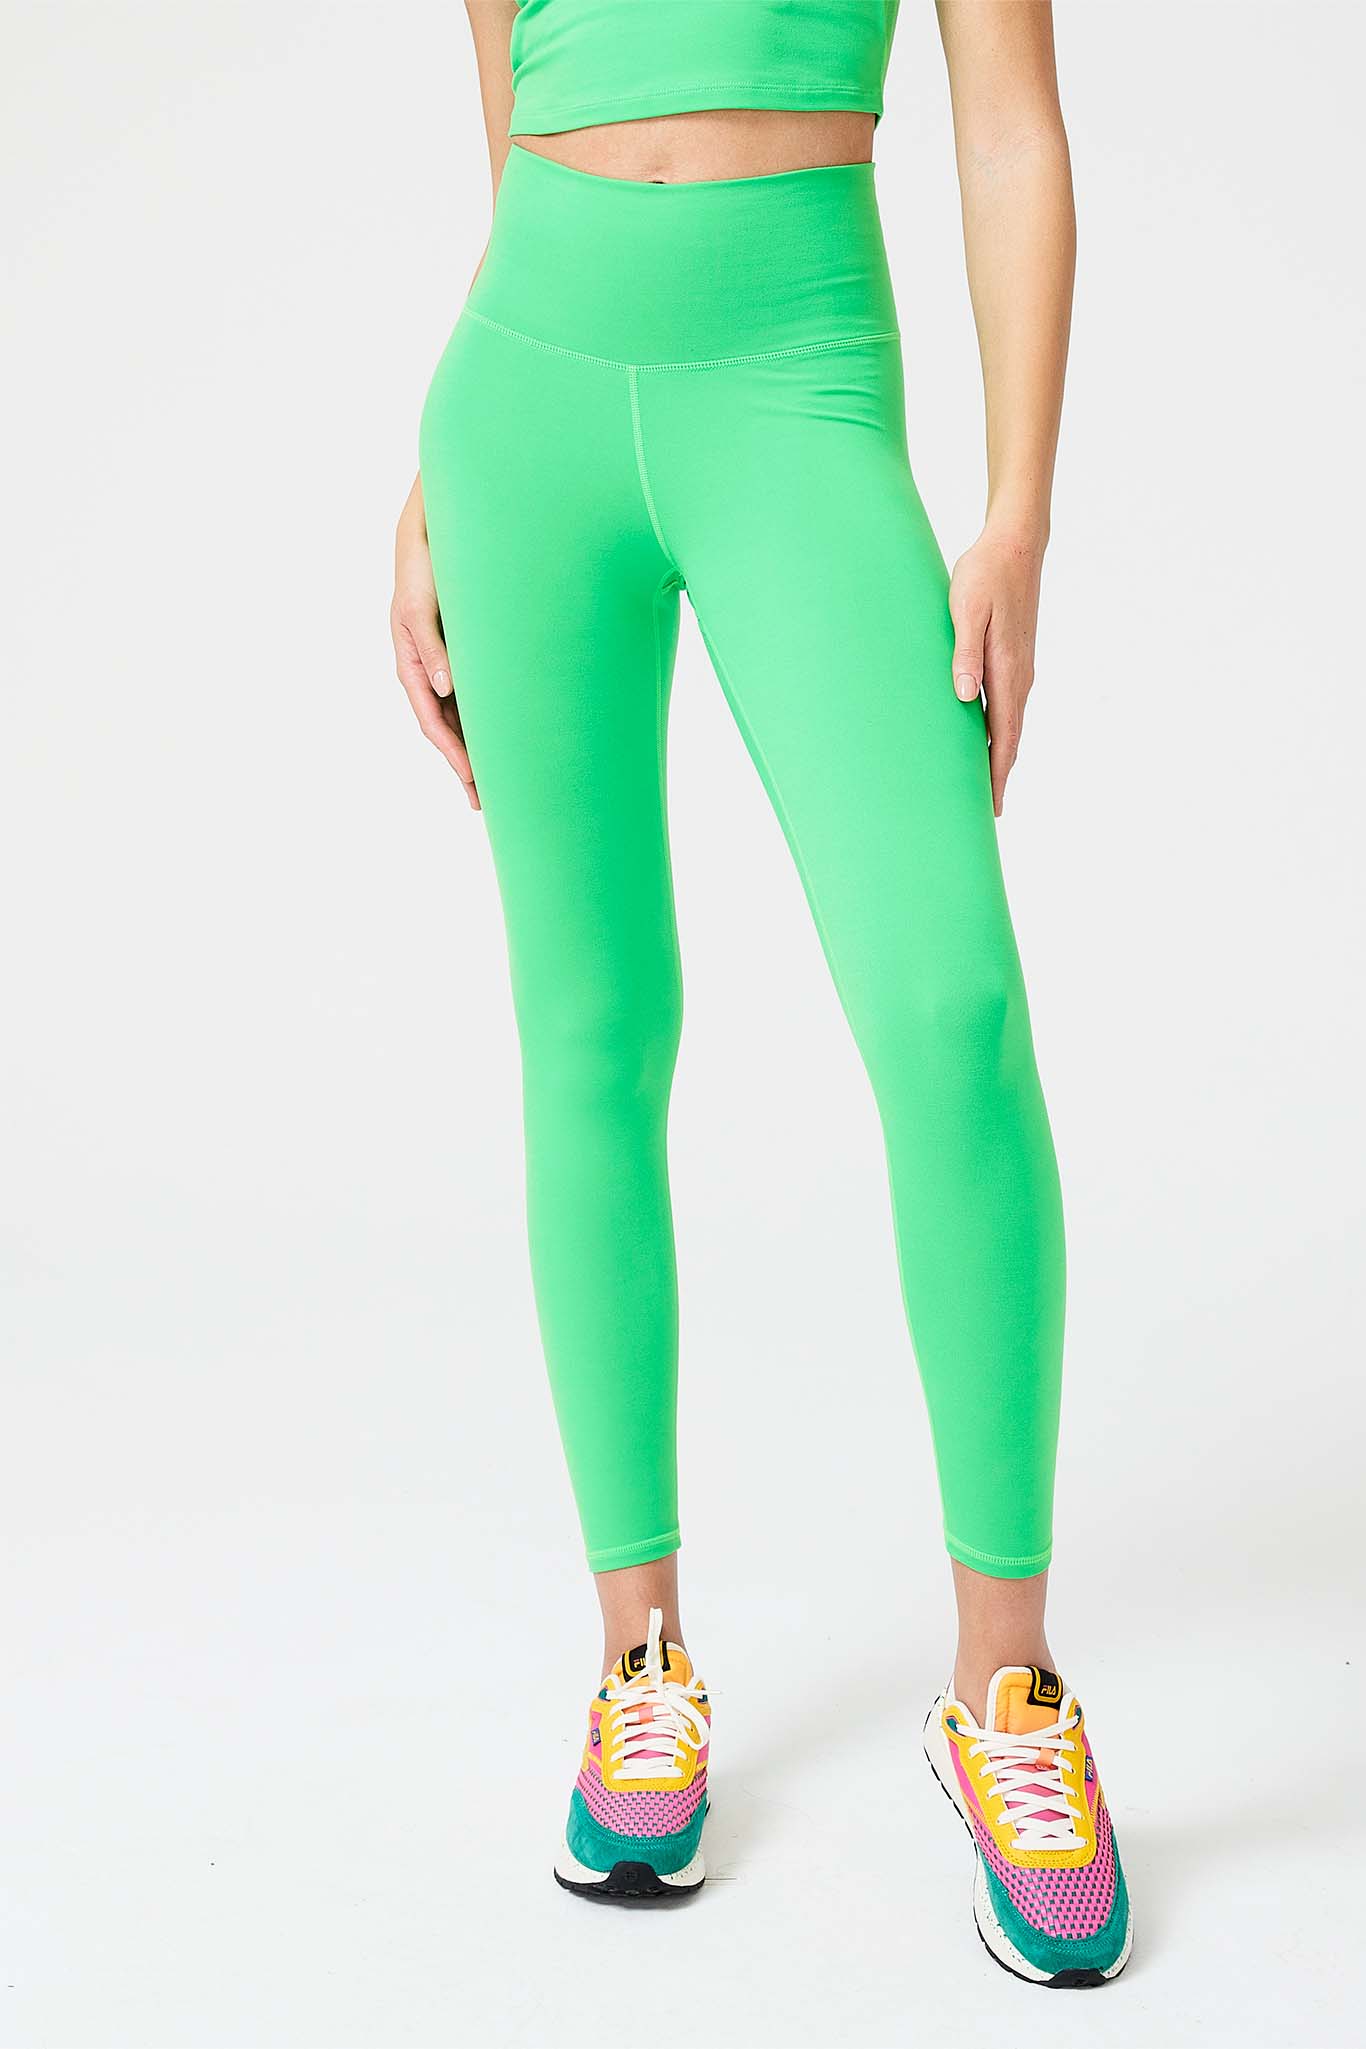 Vibrant Blue and Green Ombre Leggings